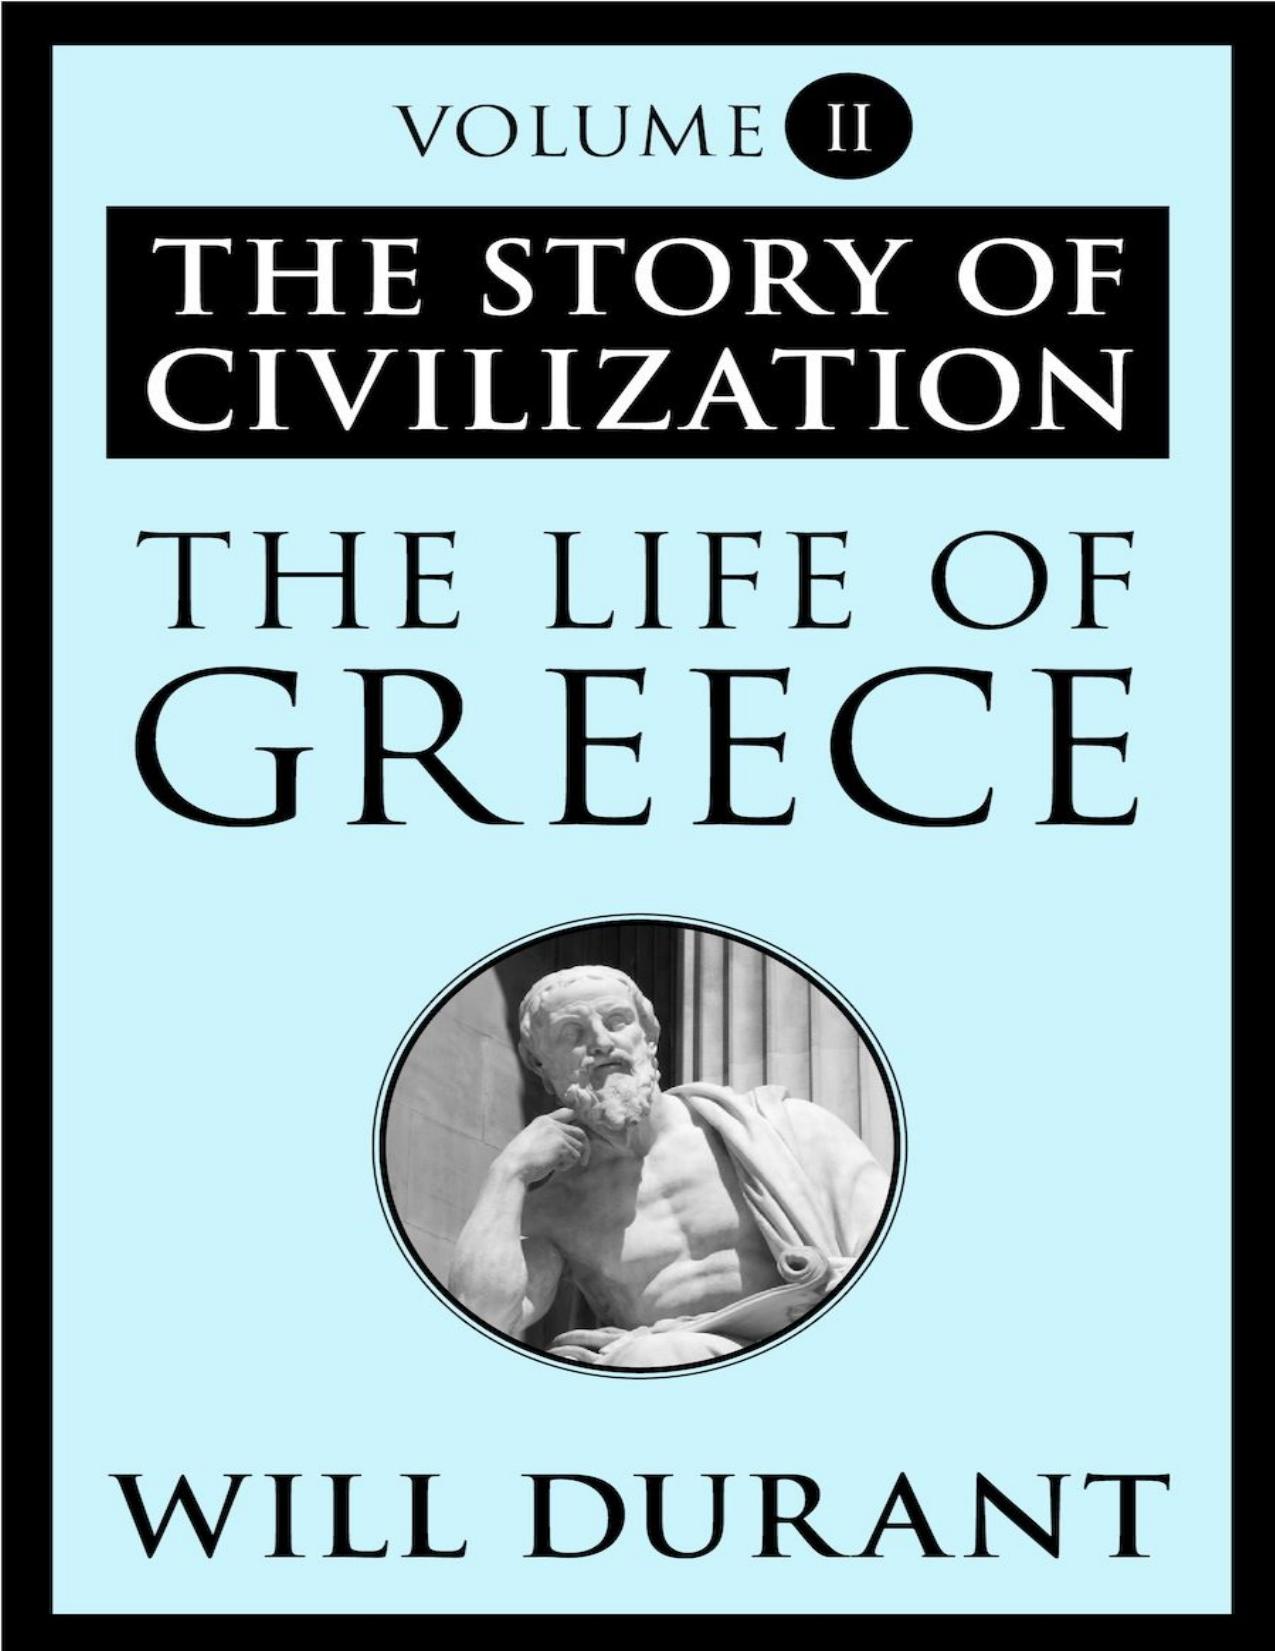 The Life of Greece: The Story of Civilization by Will Durant